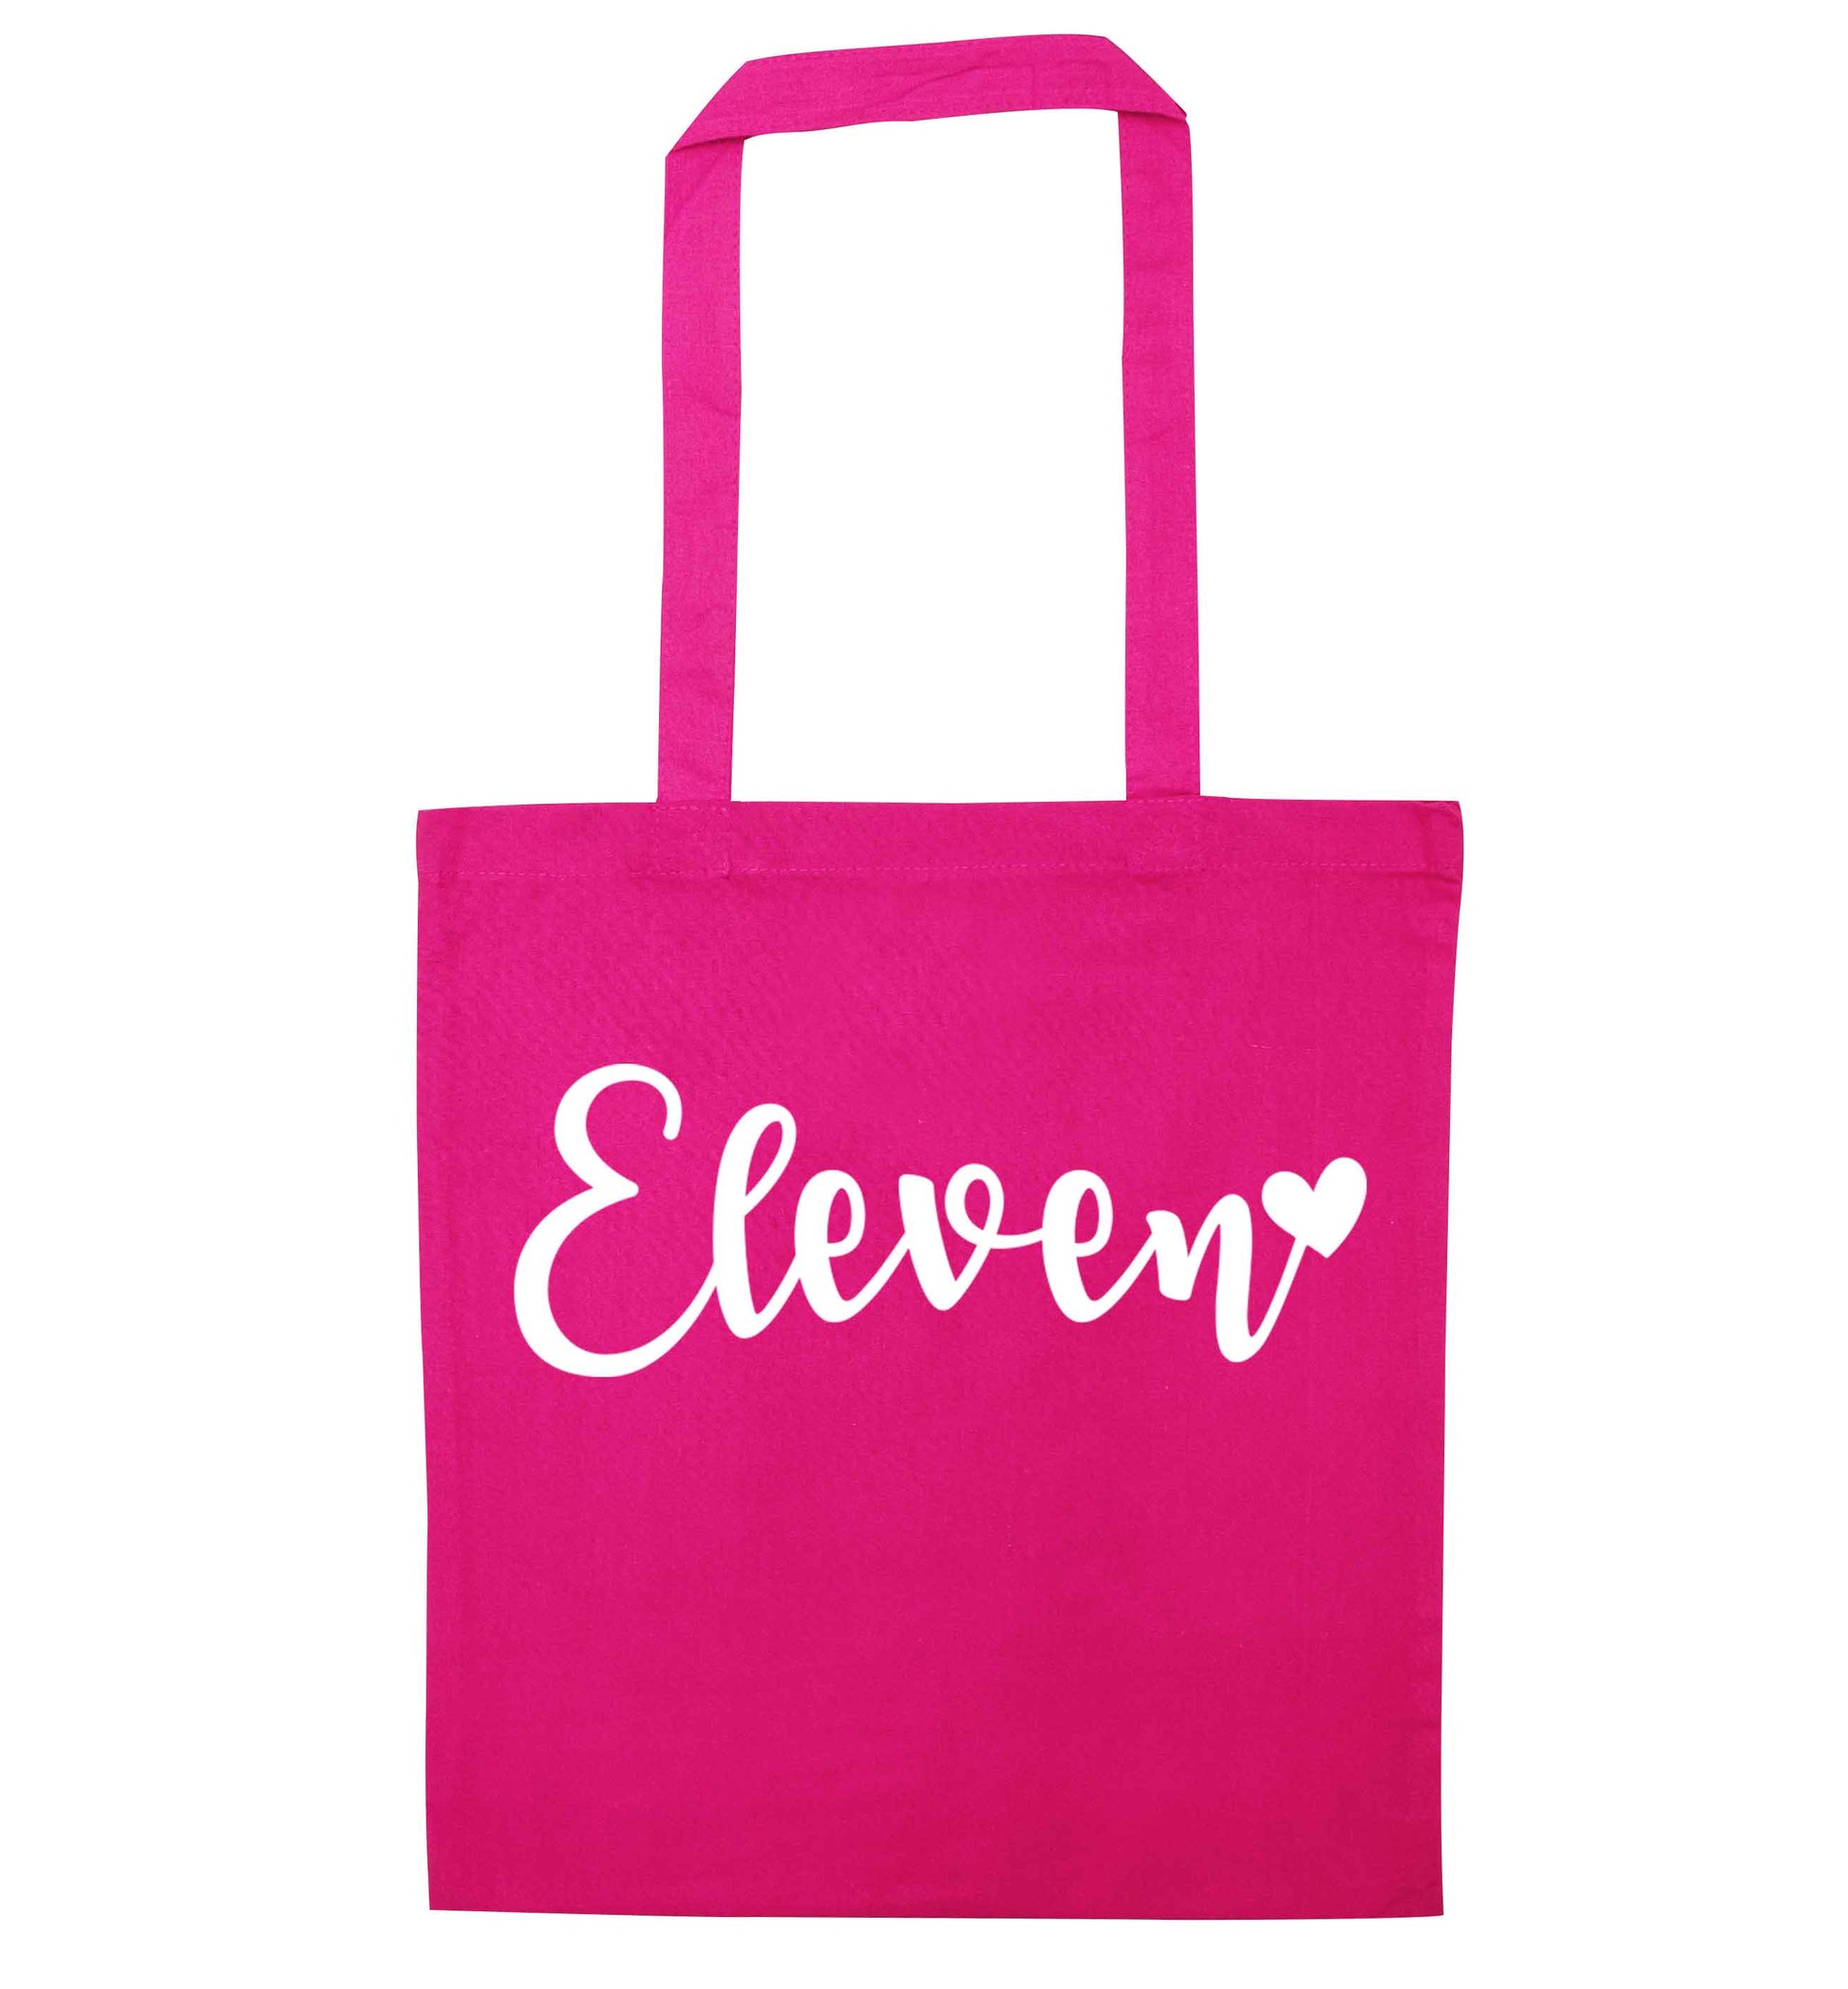 Eleven and heart! pink tote bag